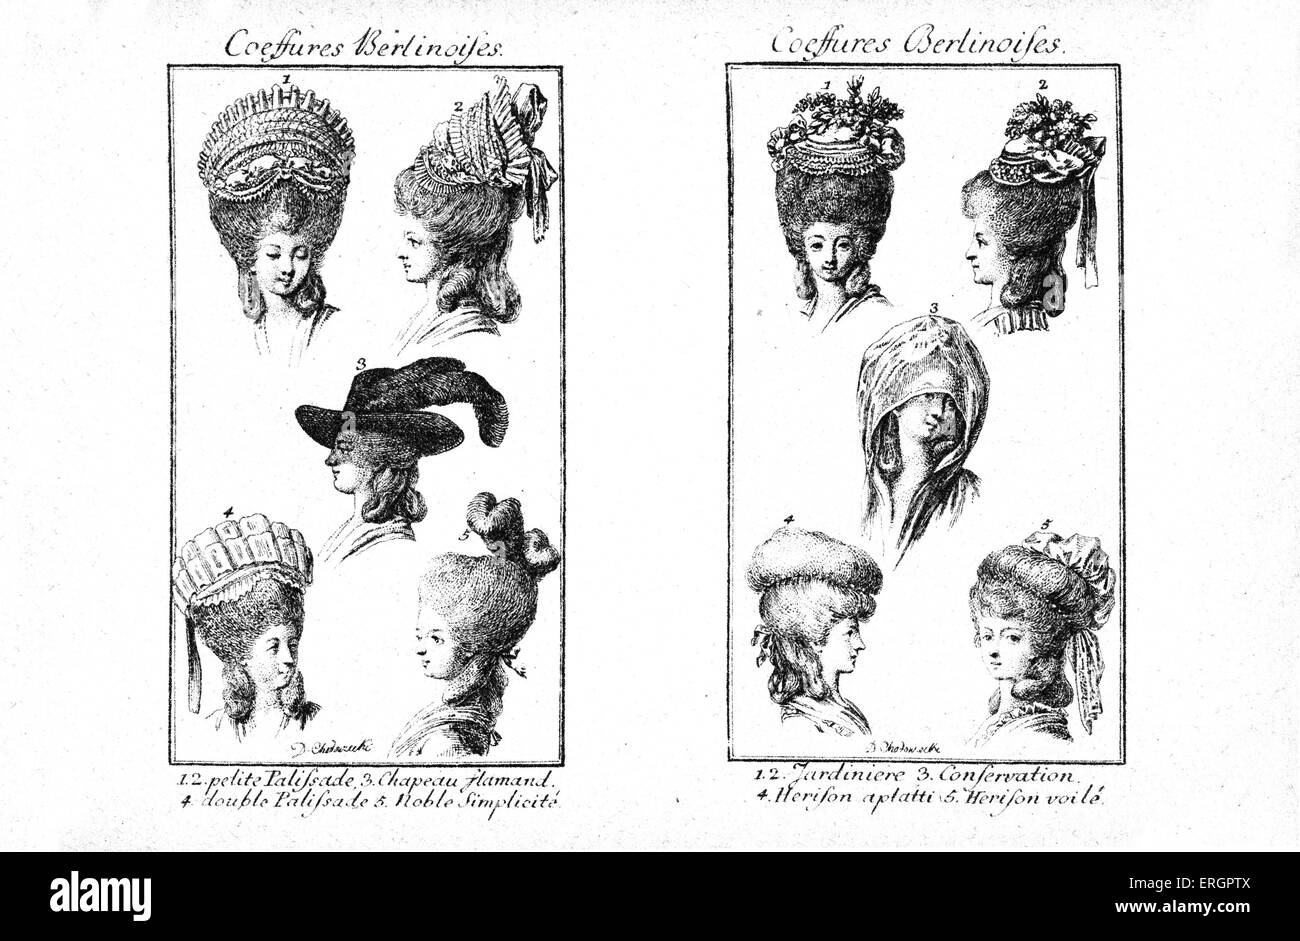 Berlin headdresses 1790. Selection of popular of accessory styles from the German capital. Stock Photo